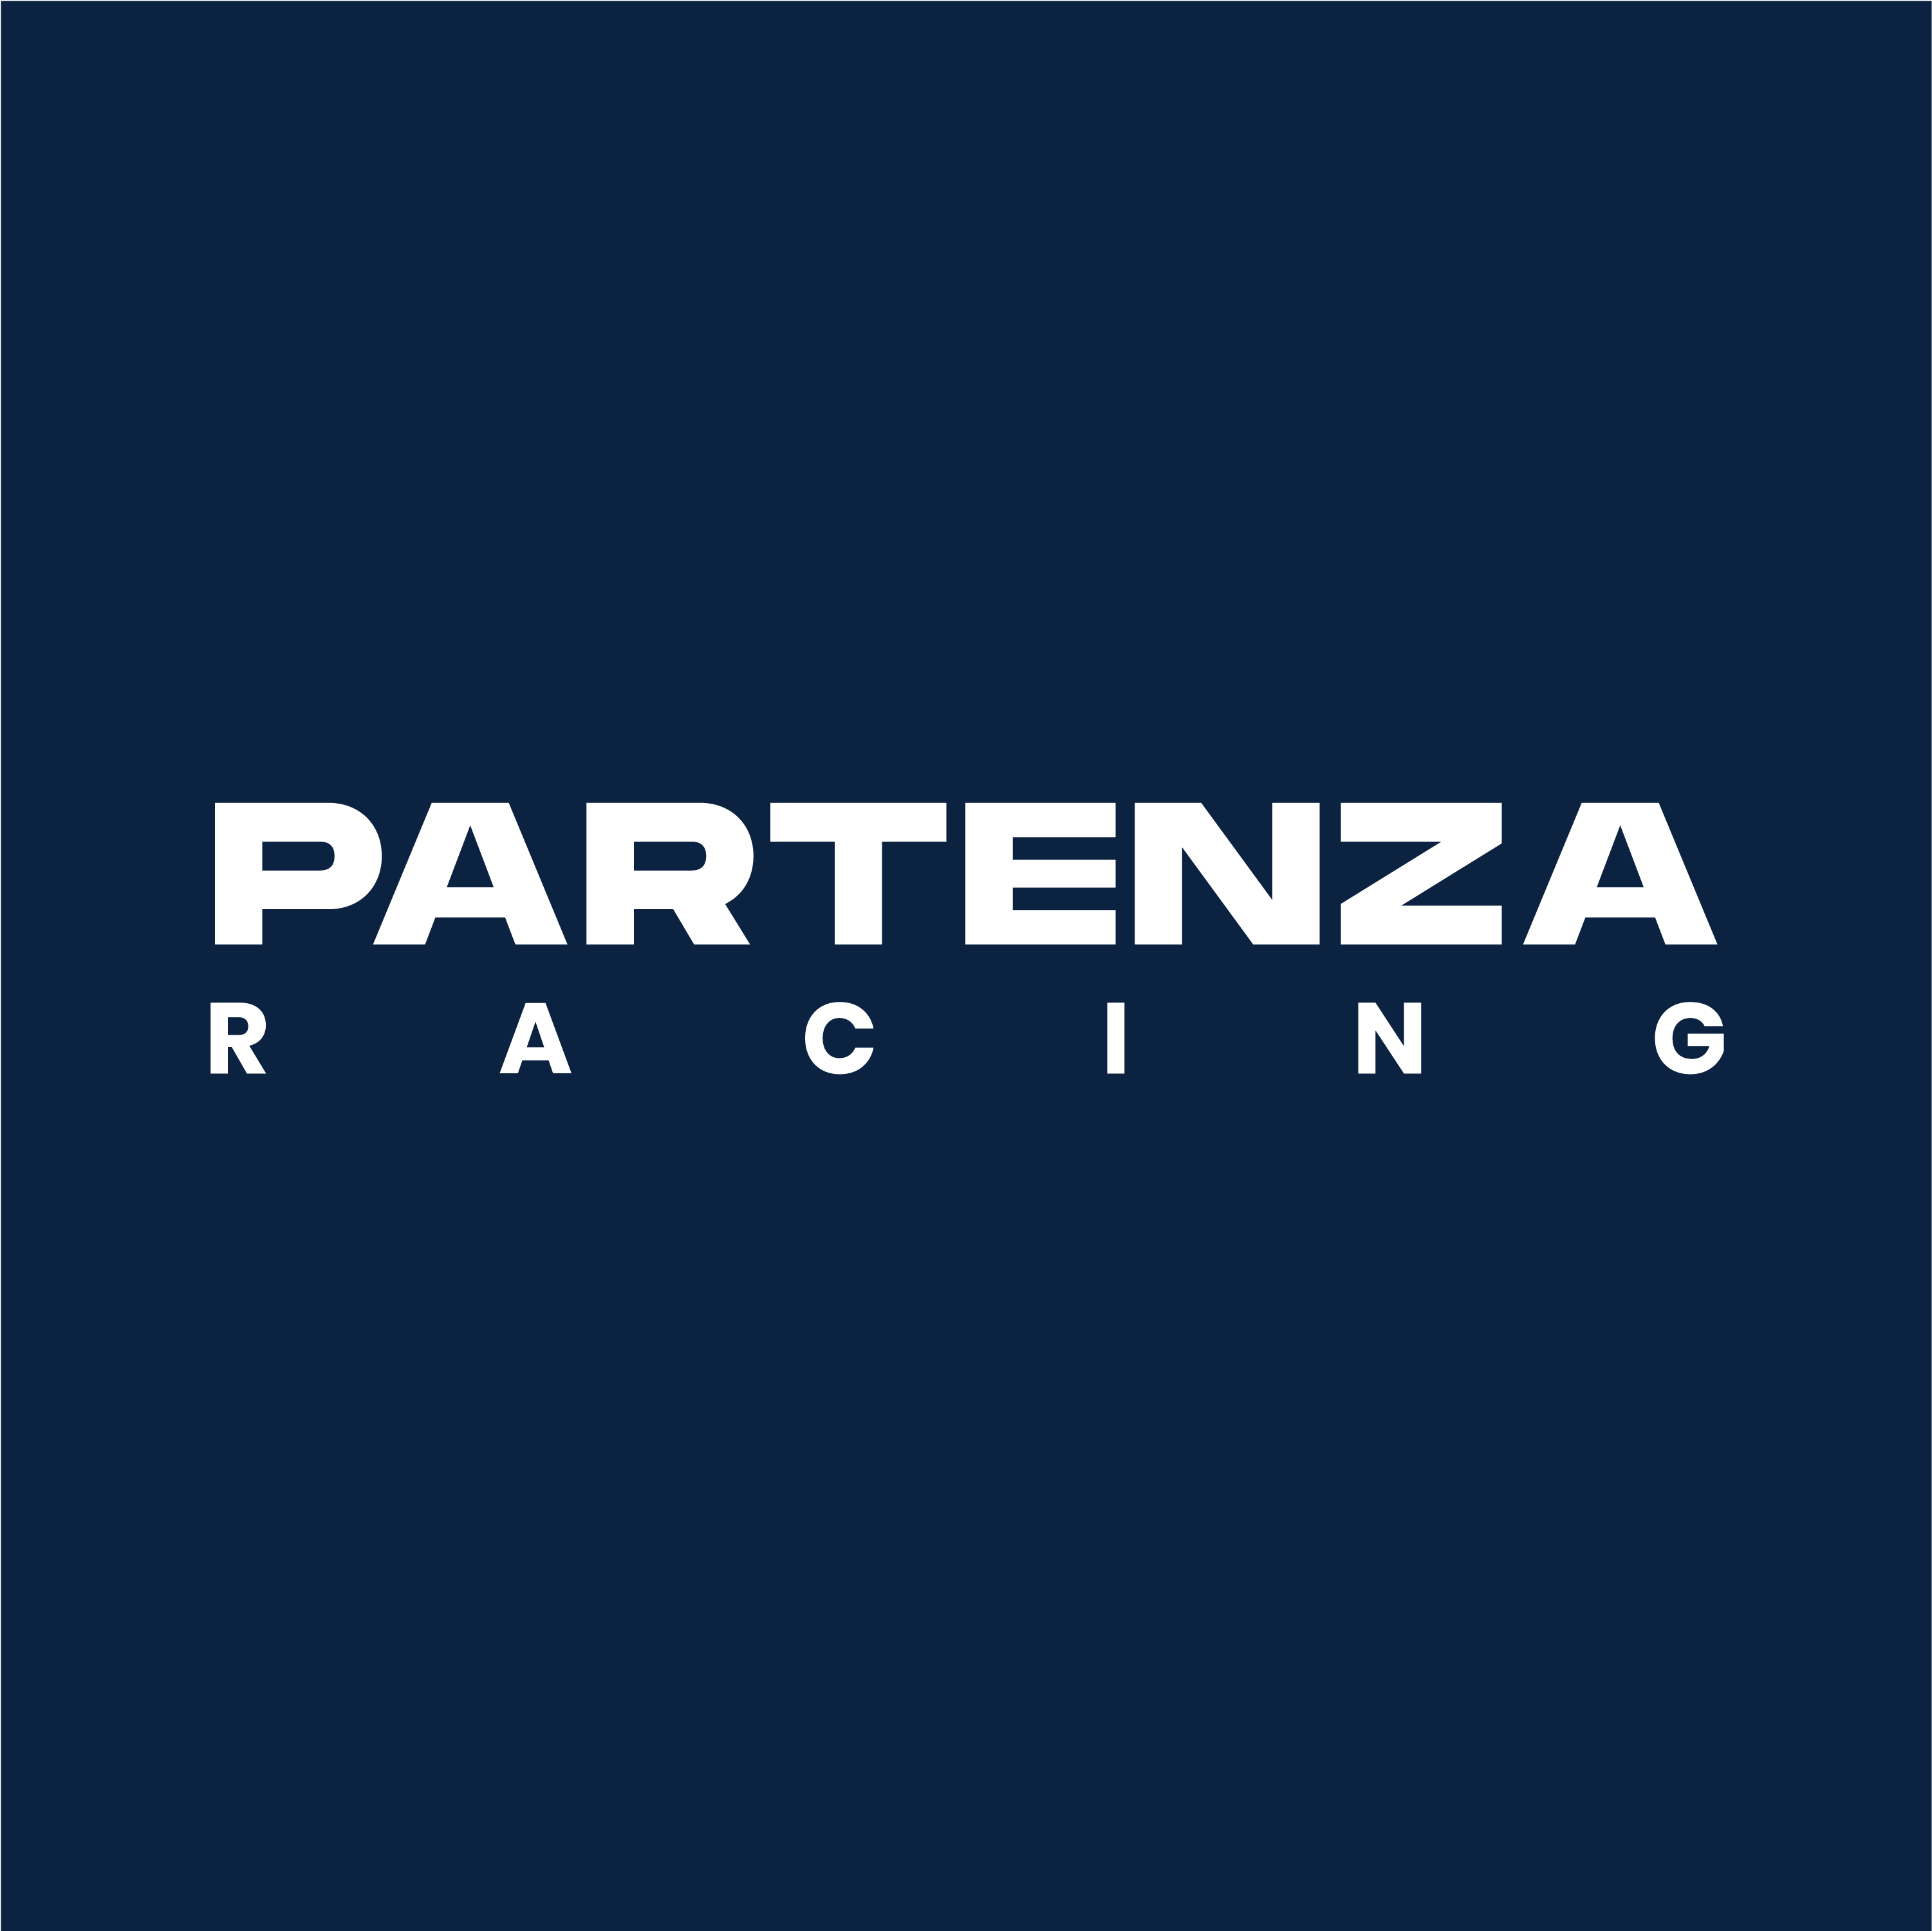 Club Image for PARTENZA RACING